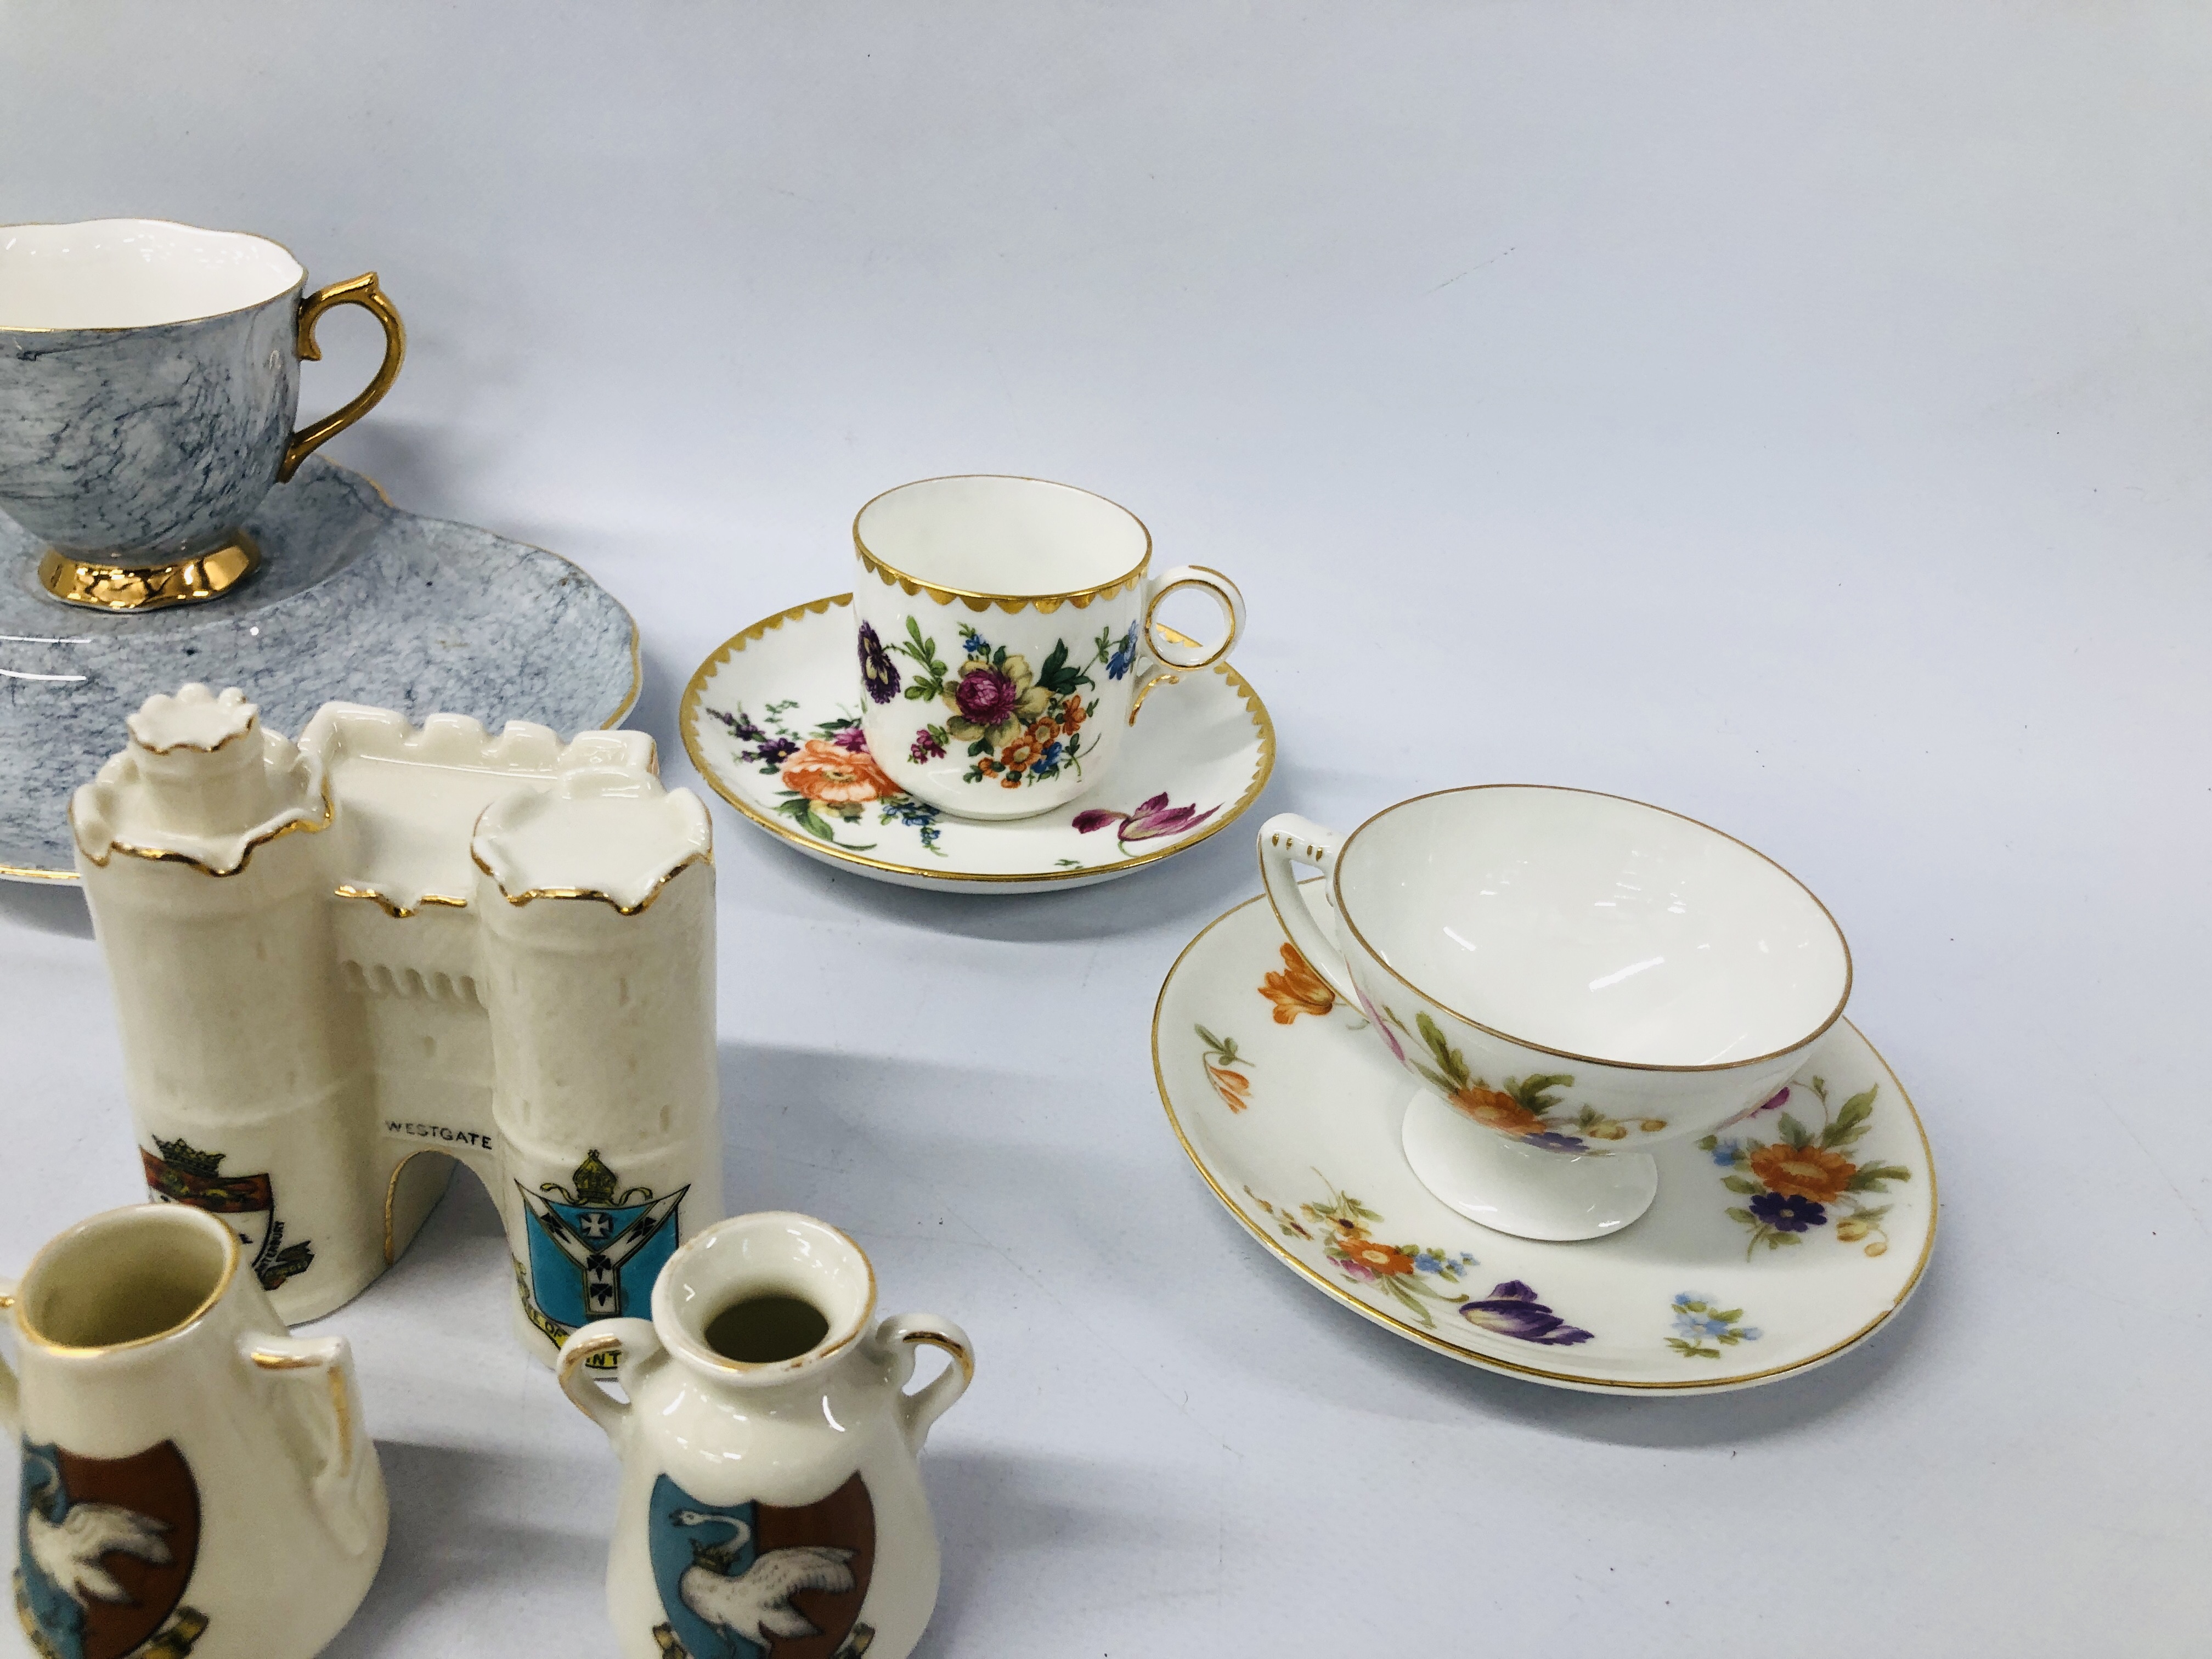 8 X VARIOUS CABINET CUPS AND SAUCERS TO INCLUDE ROYAL ALBERT "GOSSAMER" HAND PAINTED FLORAL DESIGN - Image 3 of 11